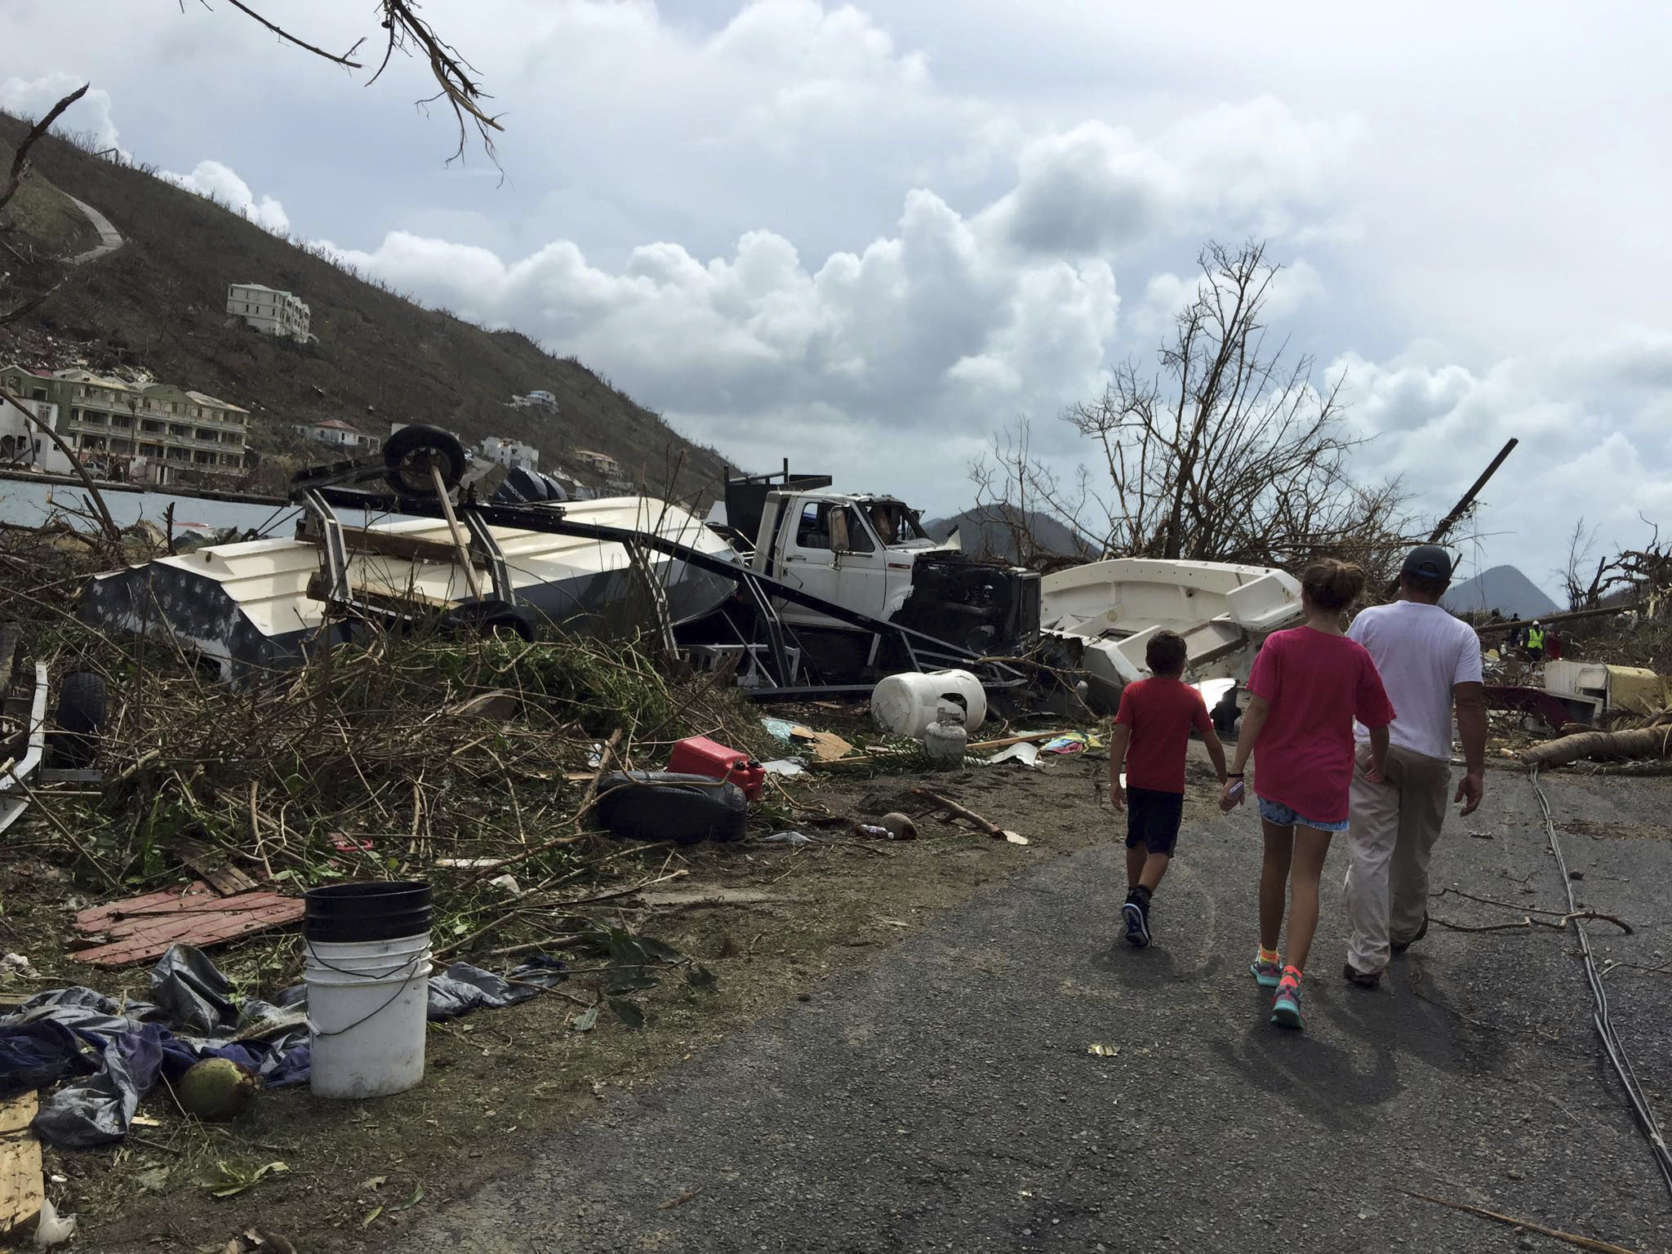 In this Sept. 8, 2017 photo, people walk near debris in the aftermath of Hurricane Irma in Tortola, in the British Virgin Islands. Britain has sent a navy ship and troops to help people on the British Virgin Islands, Anguilla and the Turks and Caicos islands that were pummeled by the hurricane. (Gabi Gonzalez via AP)